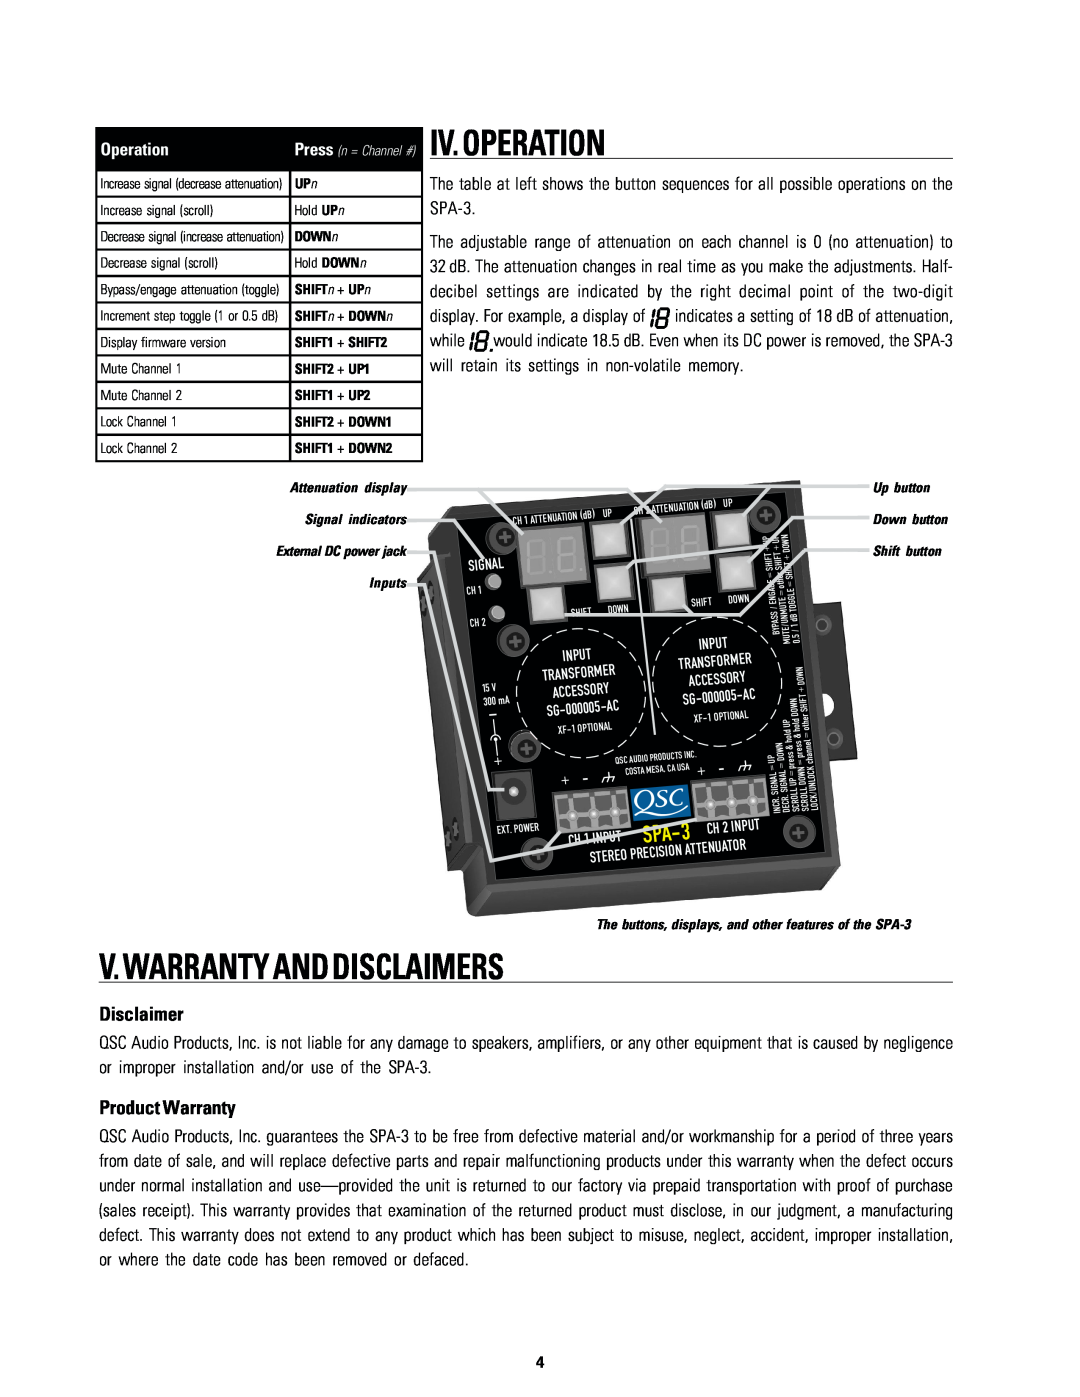 QSC Audio SPA-3 owner manual V. Warranty And Disclaimers, Product Warranty, Iv. Operation, Input, SG-000005 